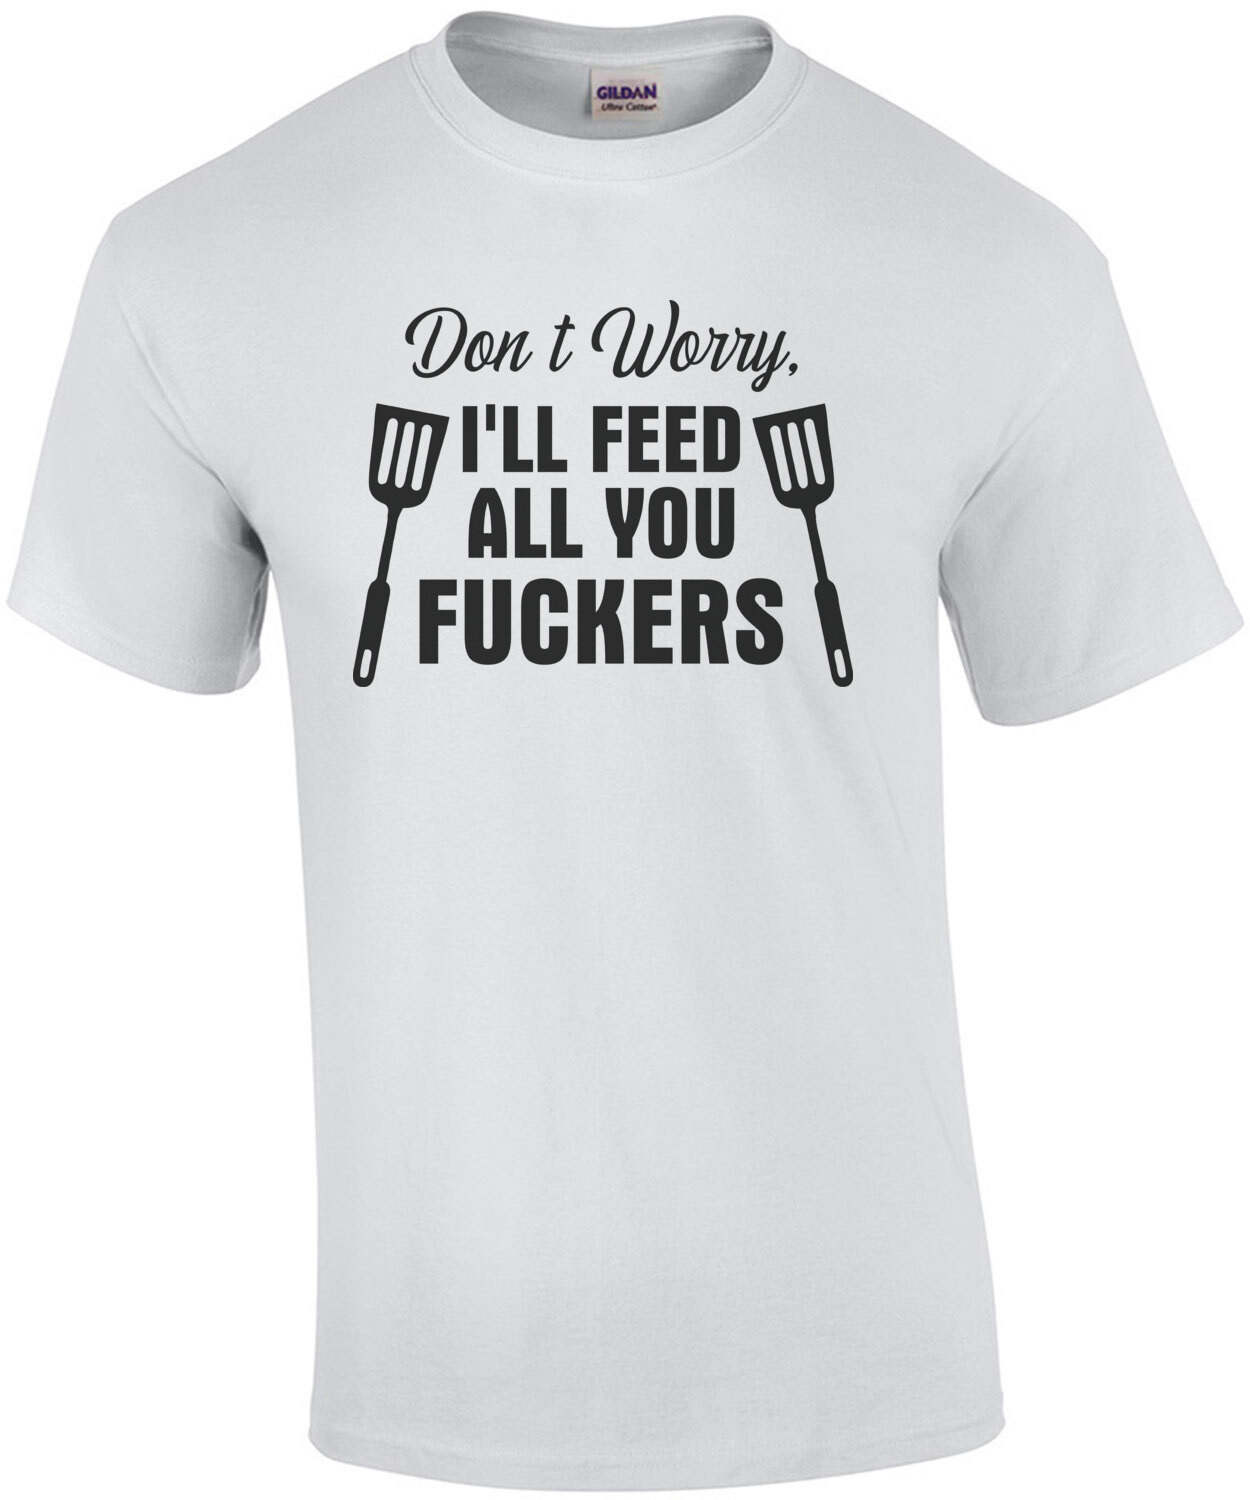 Don't Worry I'll Feed All You Fuckers Grilling Shirt